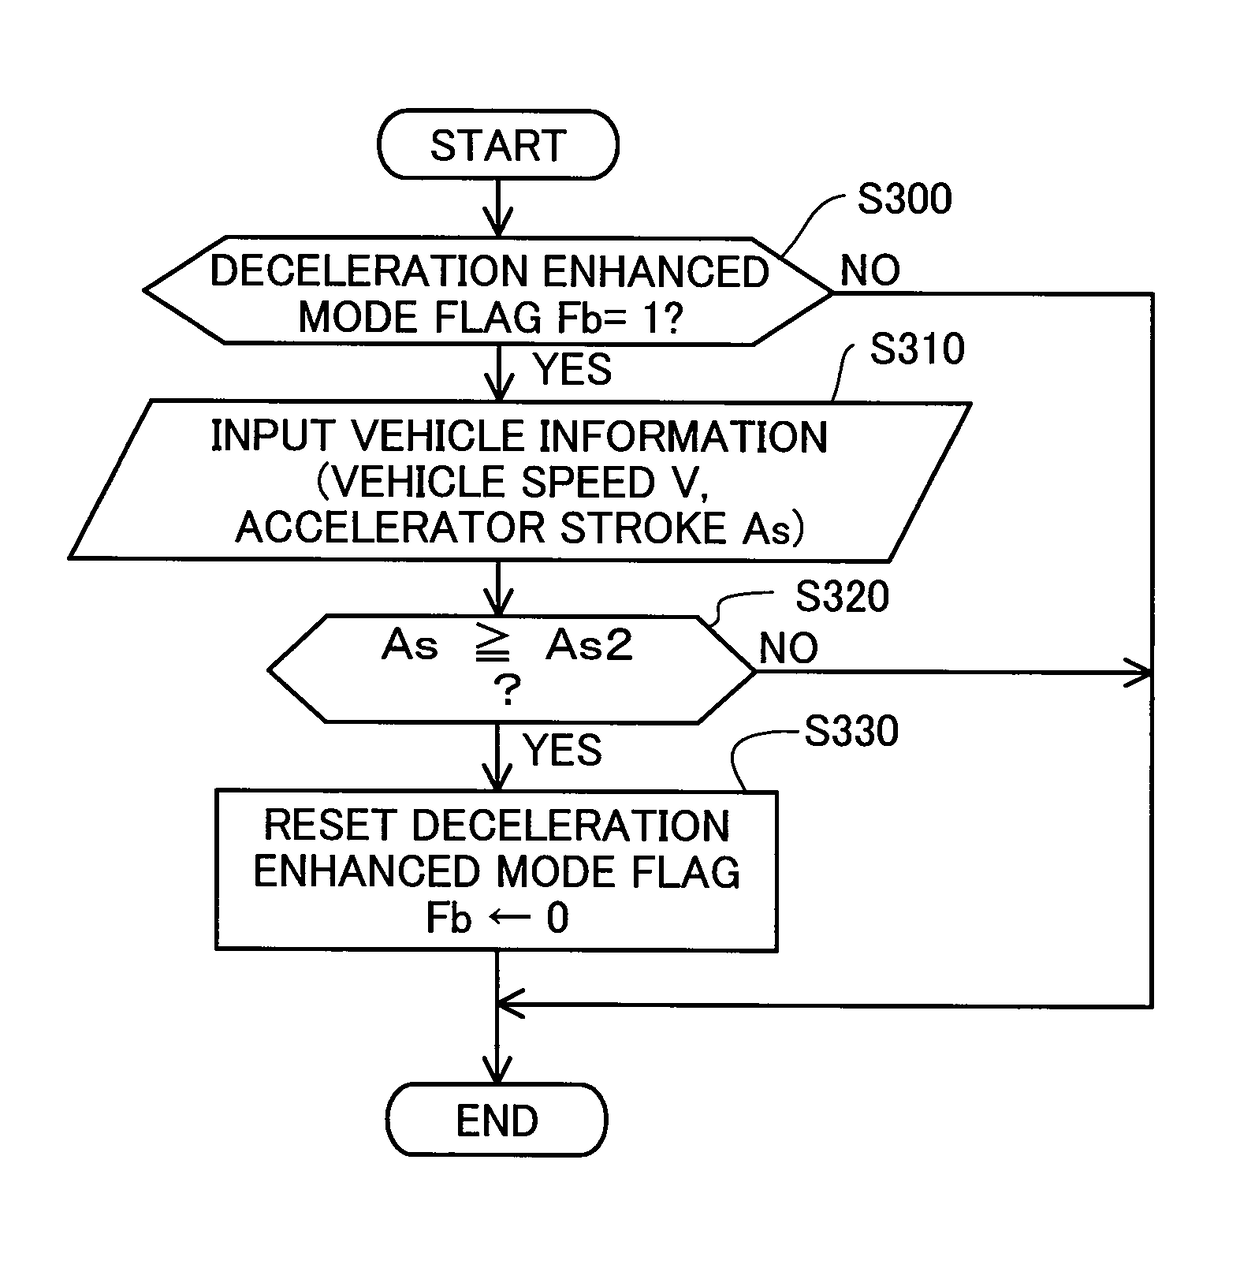 Vehicle employing ordinary and deceleration enhanced drive modes in an accelerator-off state